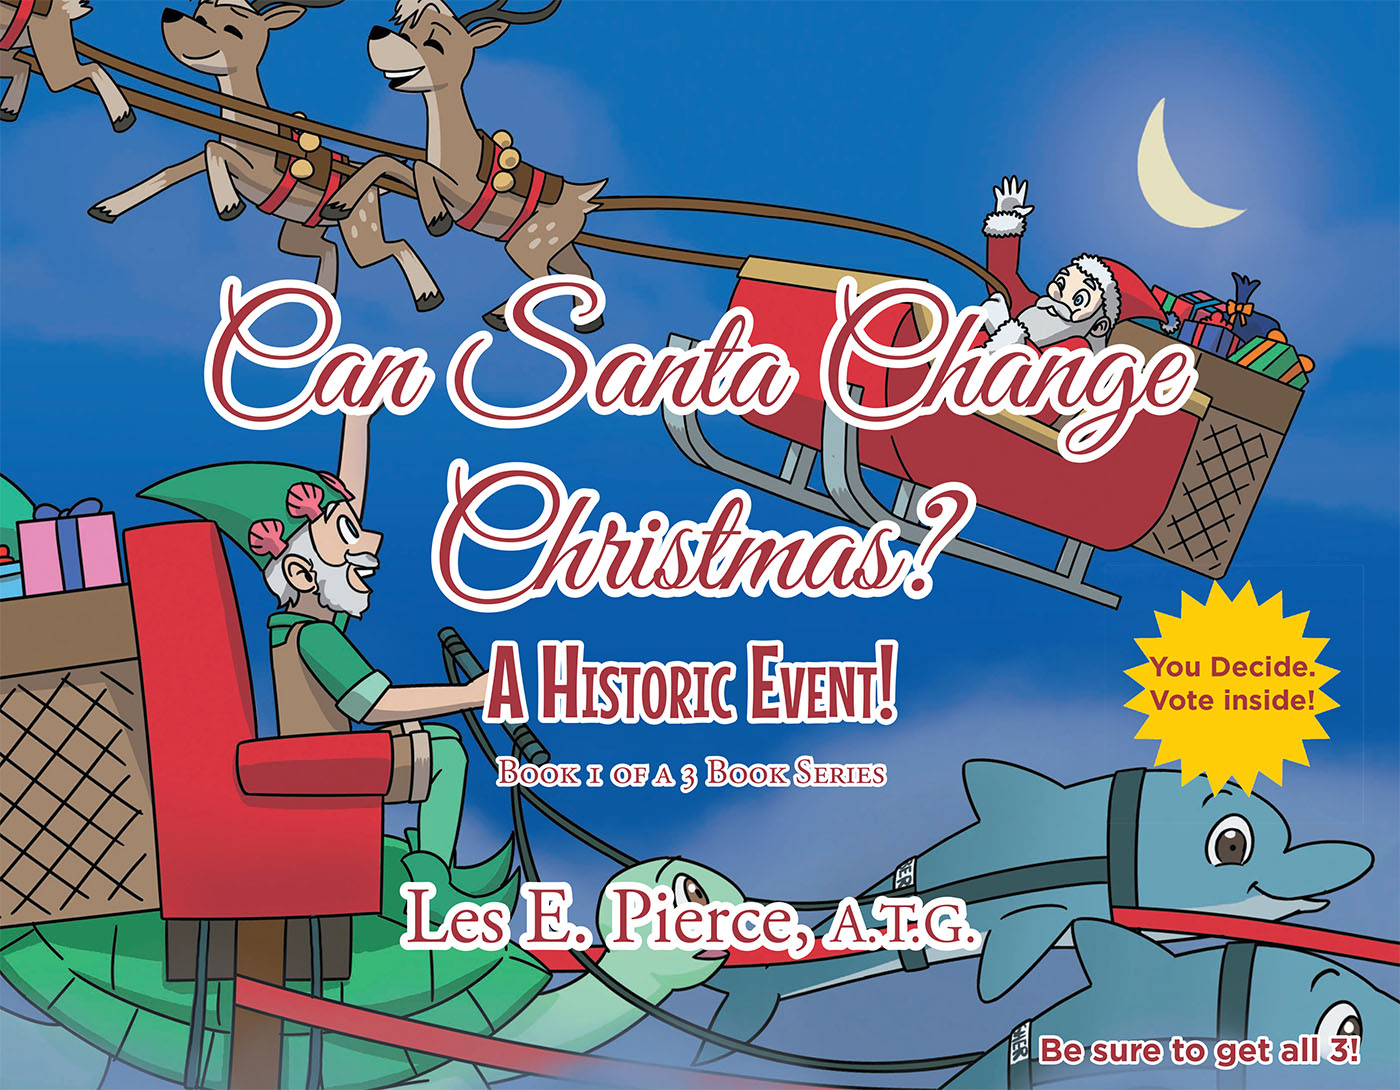 Author Les E. Pierce, A.T.G.'s New Book, 'Can Santa Change Christmas? a  Historic Event!' Is a Delightful Holiday Tale of Family and Magic | Newswire